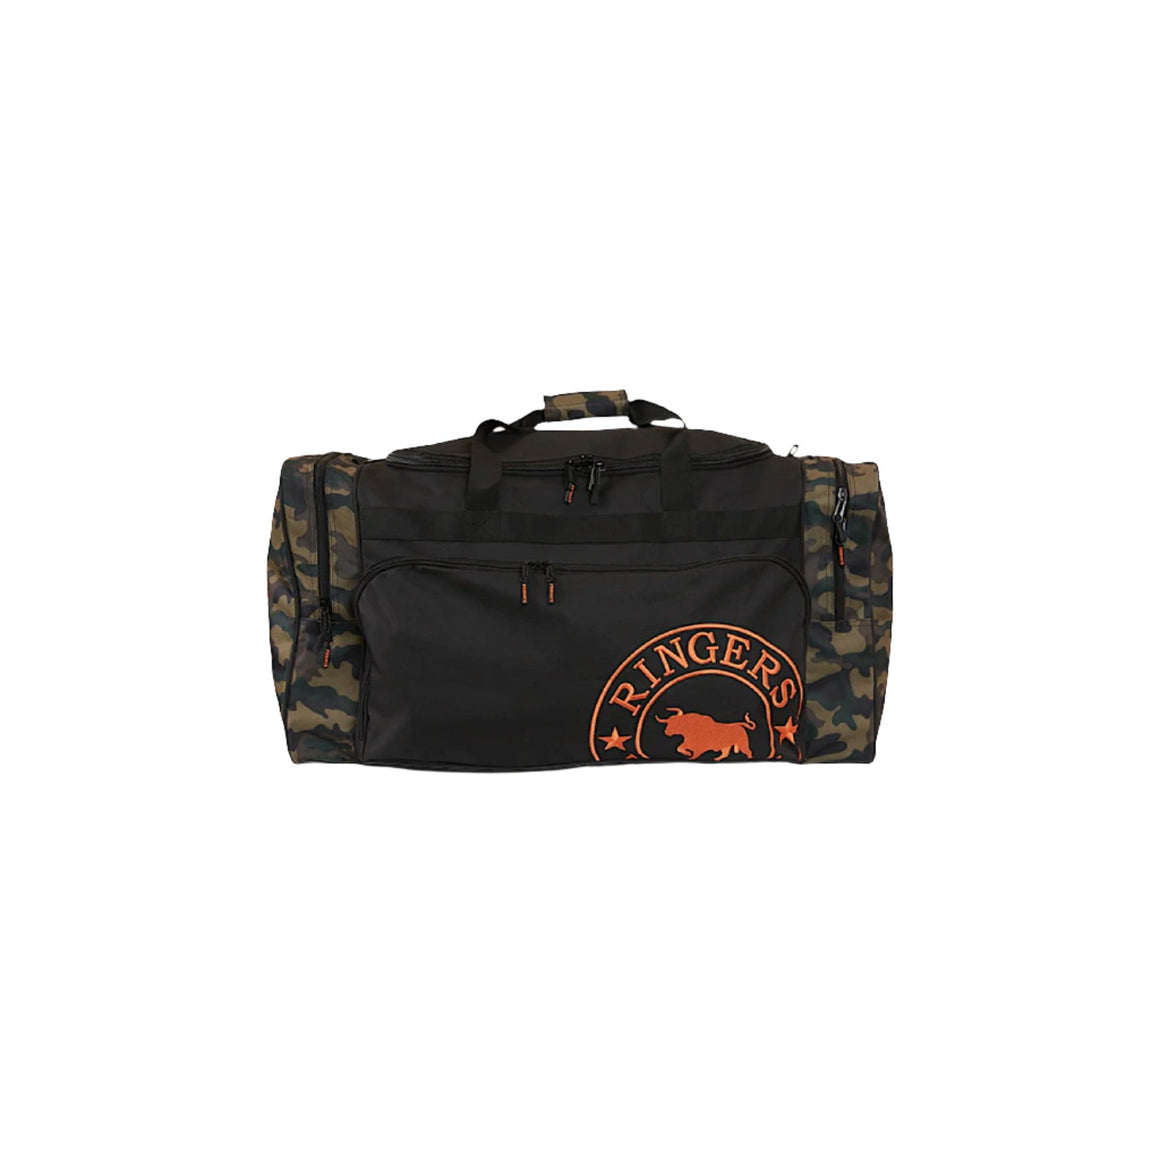 Ringers Western Rider Sports Bag Black with Camo